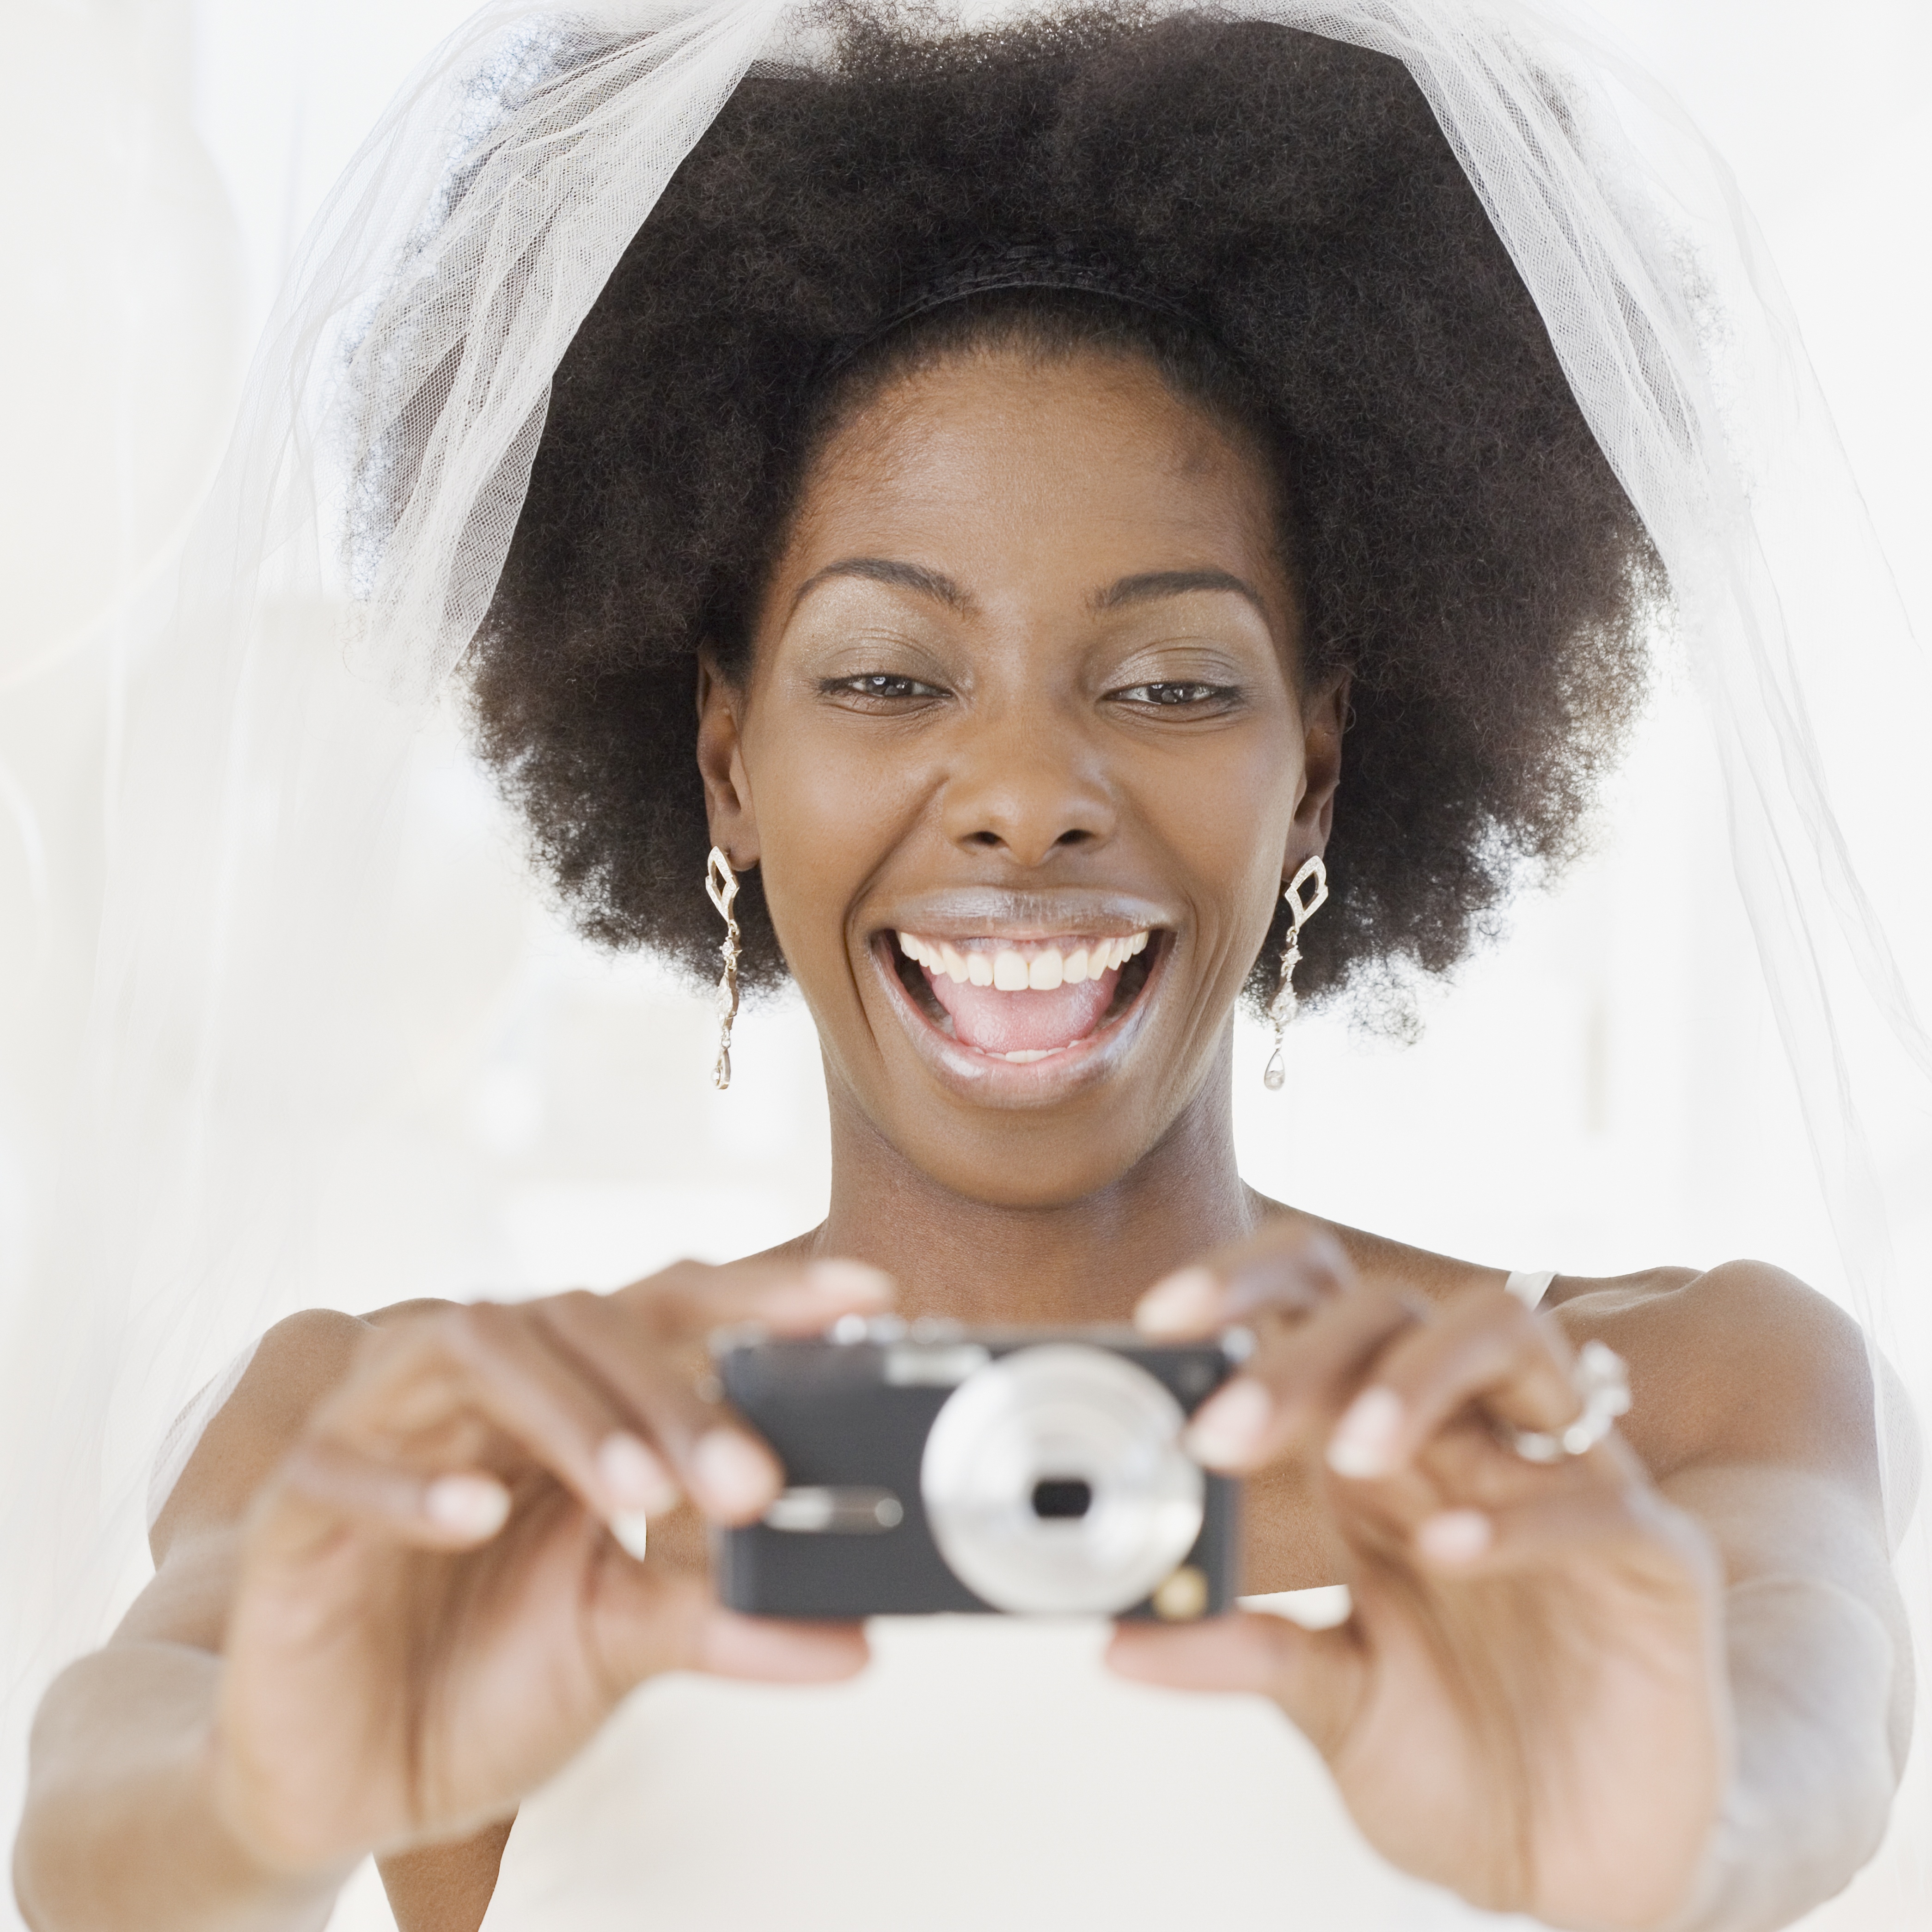 African bride taking photograph | Source: Getty Images